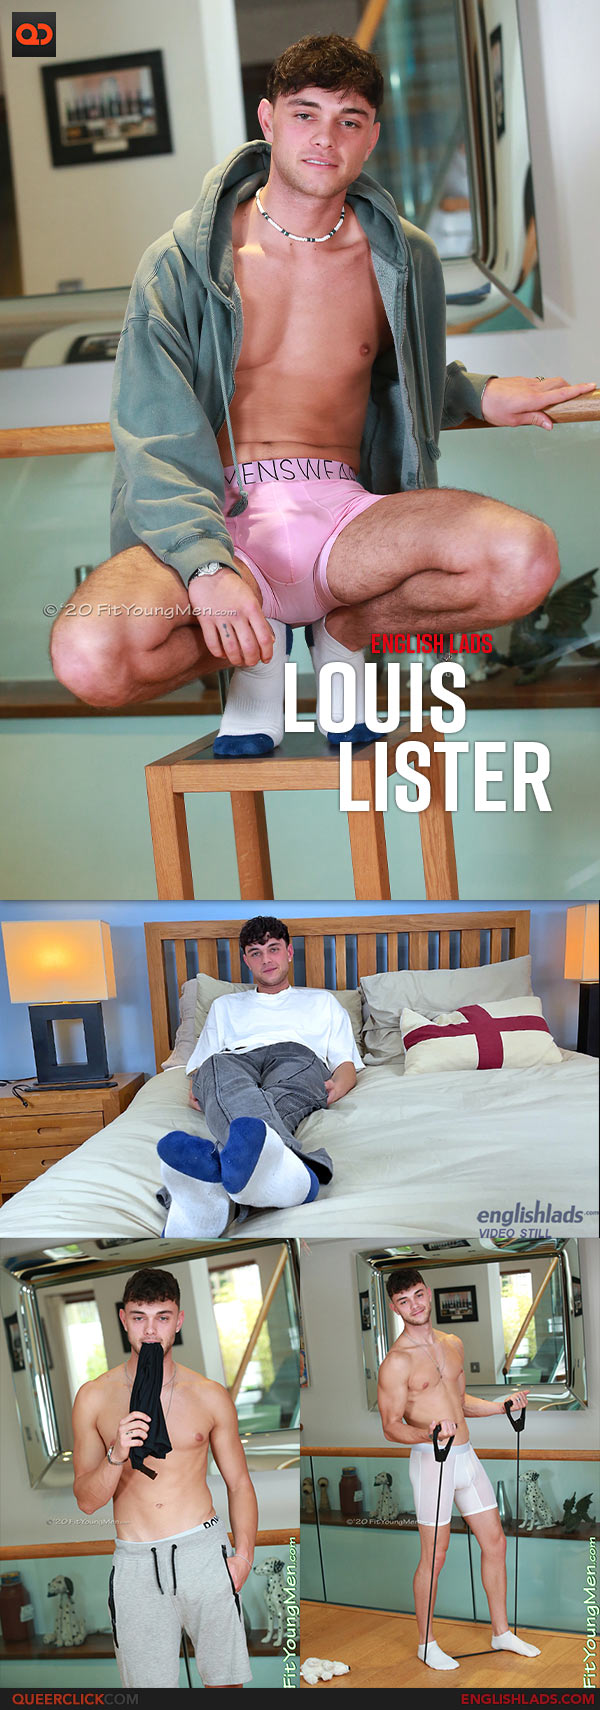 English Lads: Young, Straight, Lean Lad Louis Lister Wanks his Hard Uncut Cock